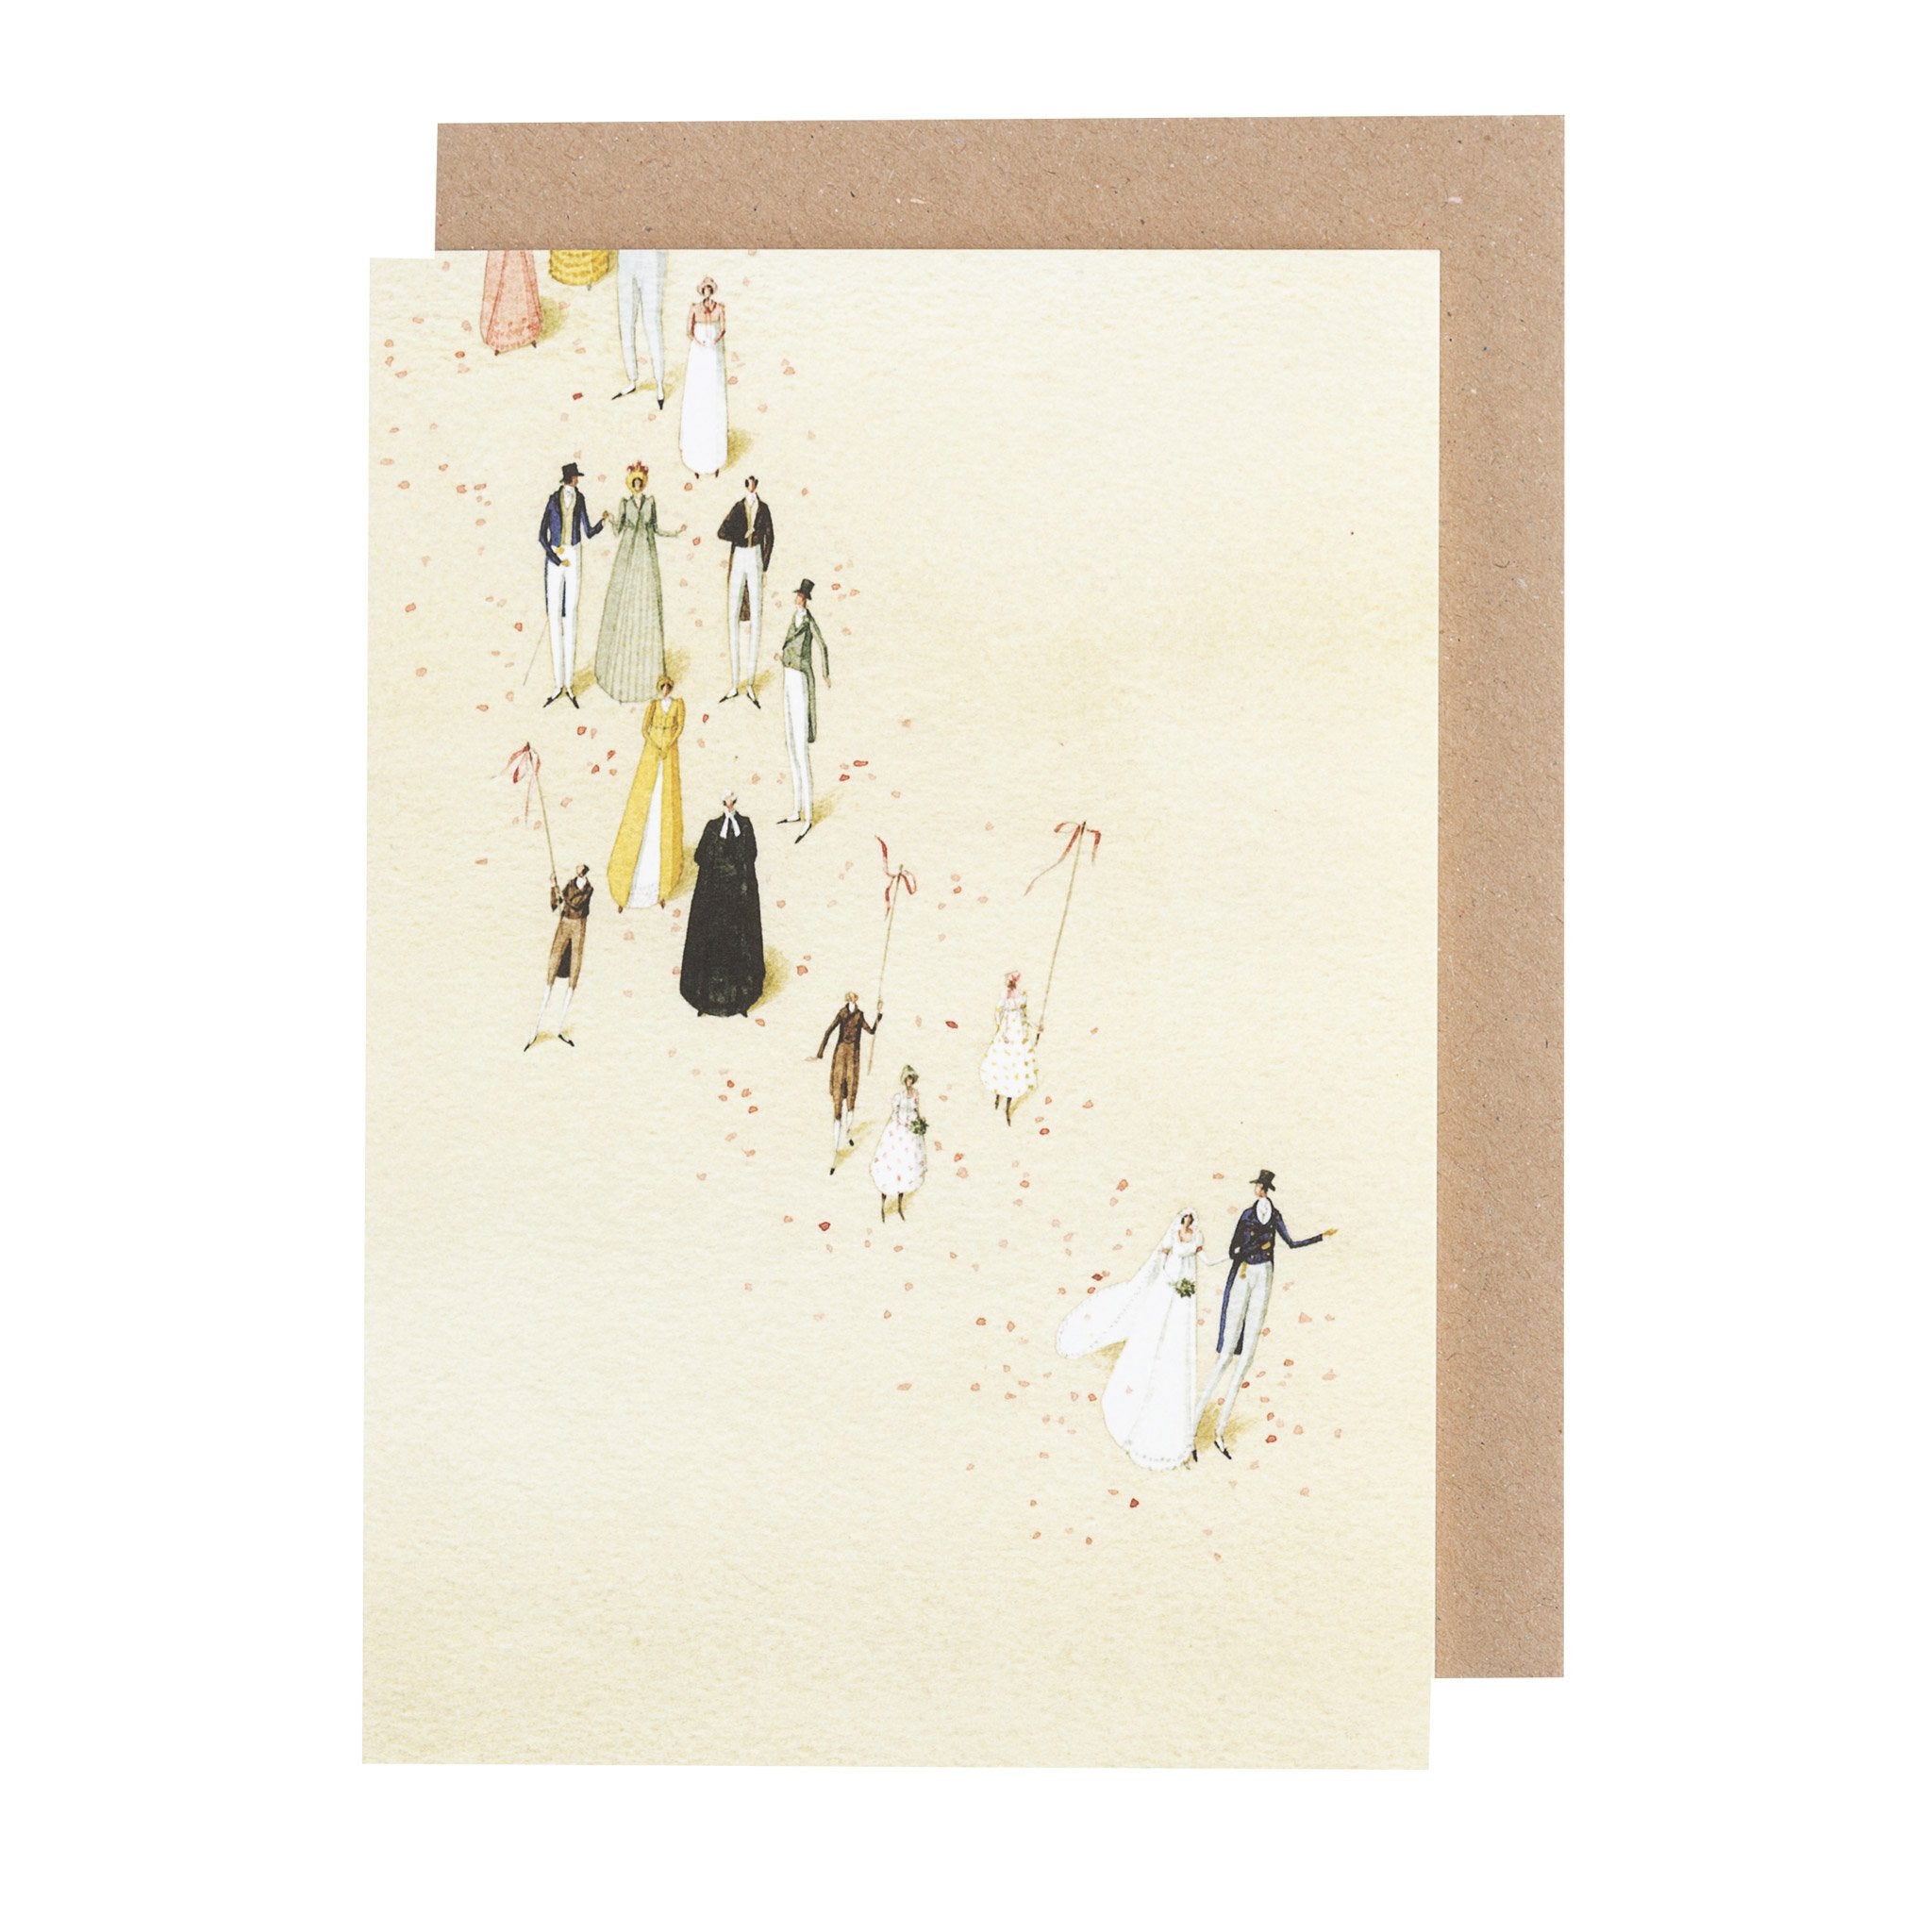 A Wedding Greeting Card with people walking on it, illustrated by Laura Stoddart, from Hester &amp; Cook.